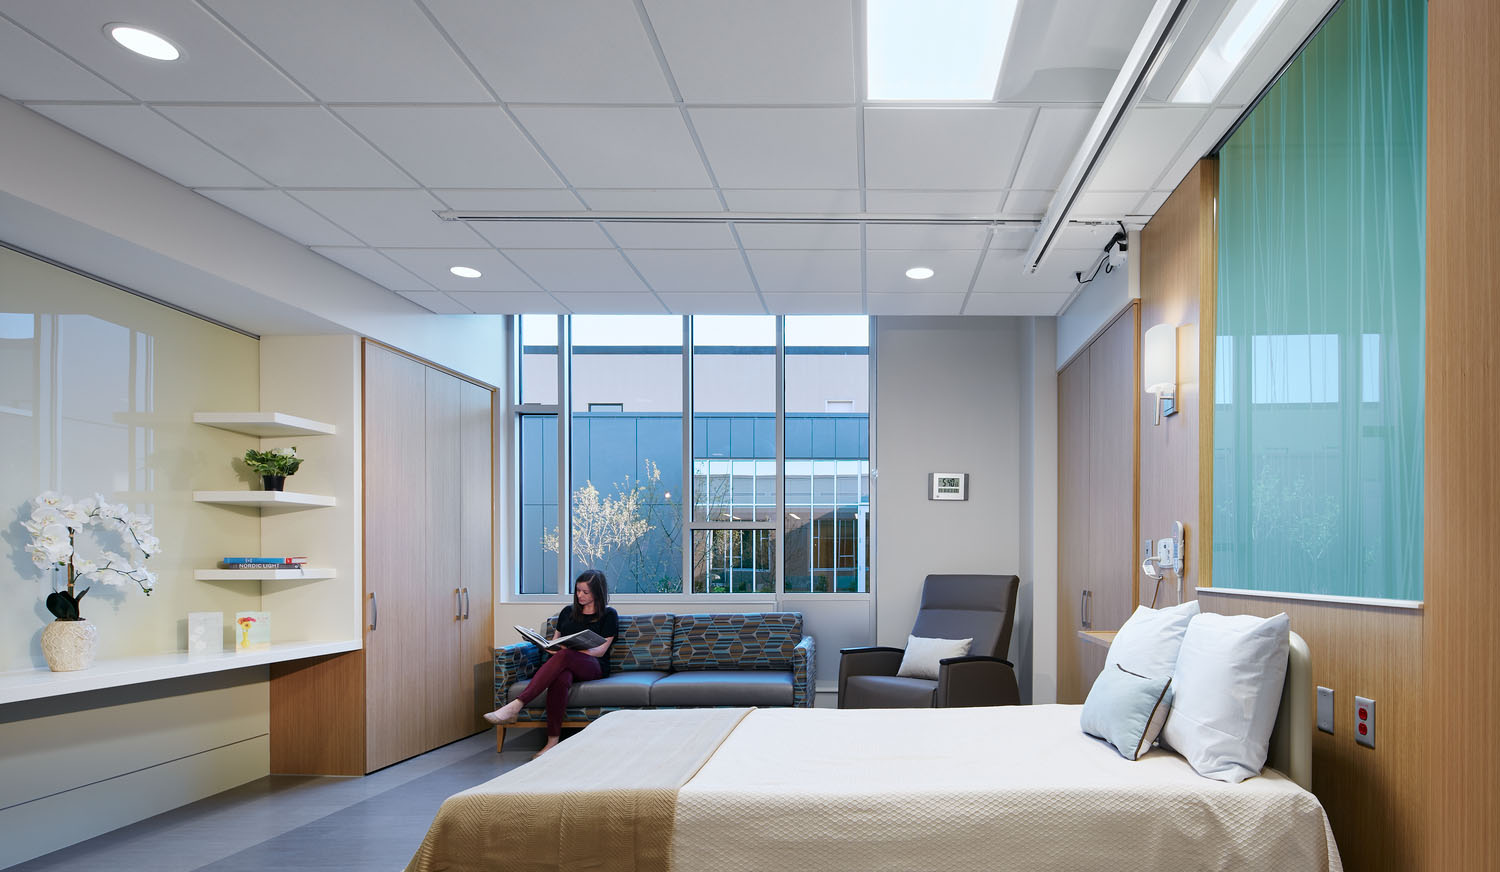 CentraCare Health System Melrose interior patient room